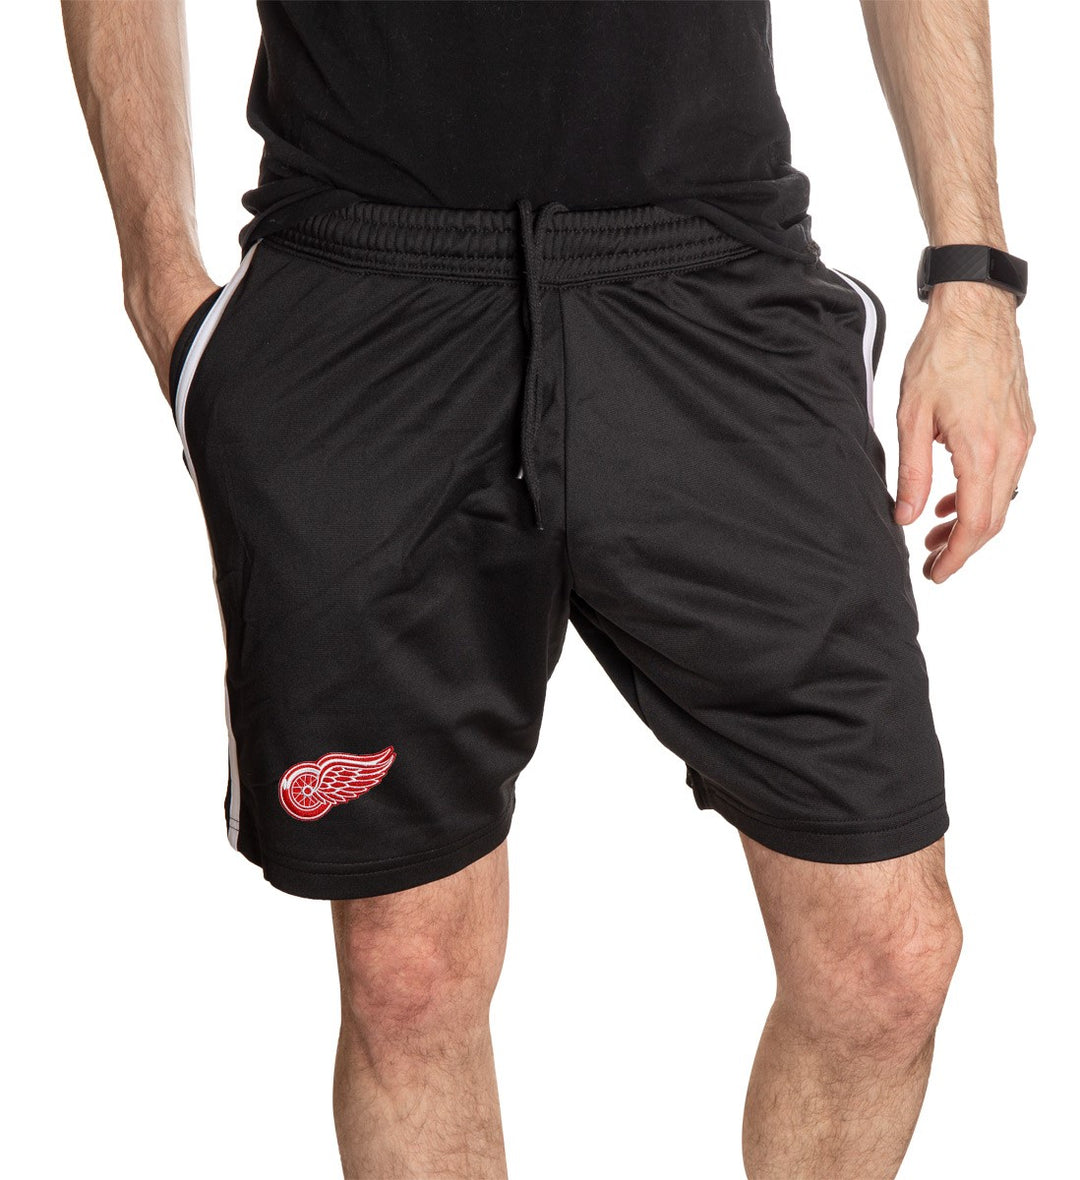 NHL Mens Official Team Two-Stripe Shorts- Detroit Red Wings Full Front Photo Of Man Wearing Shorts WIth Hand In Pocket